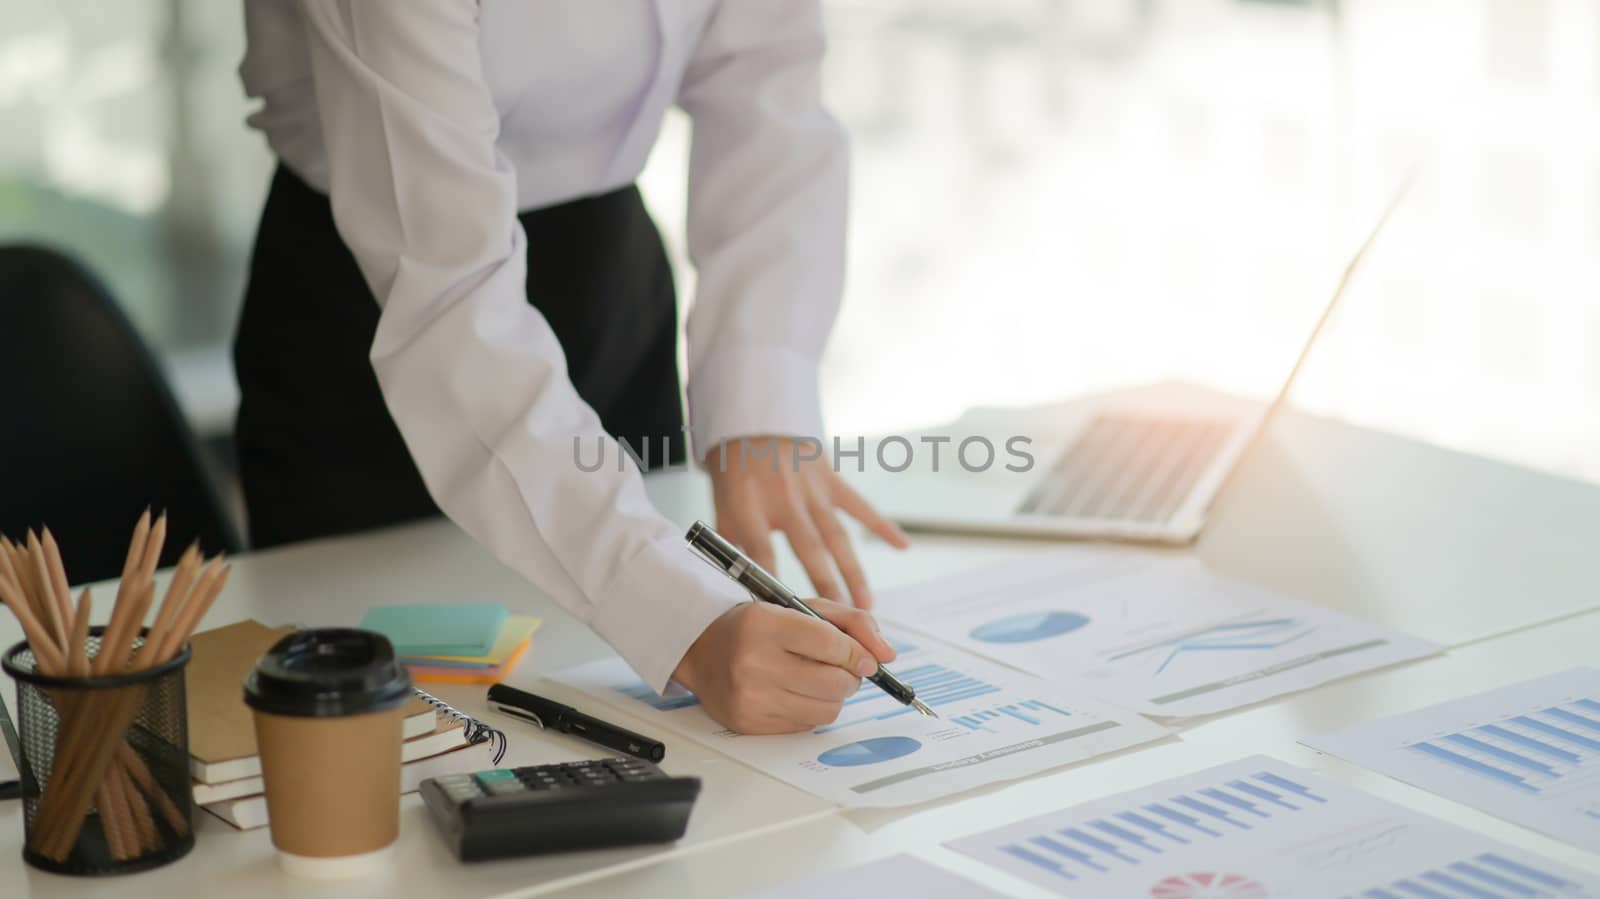 The auditor is analyzing the data graph of the organization in a by poungsaed